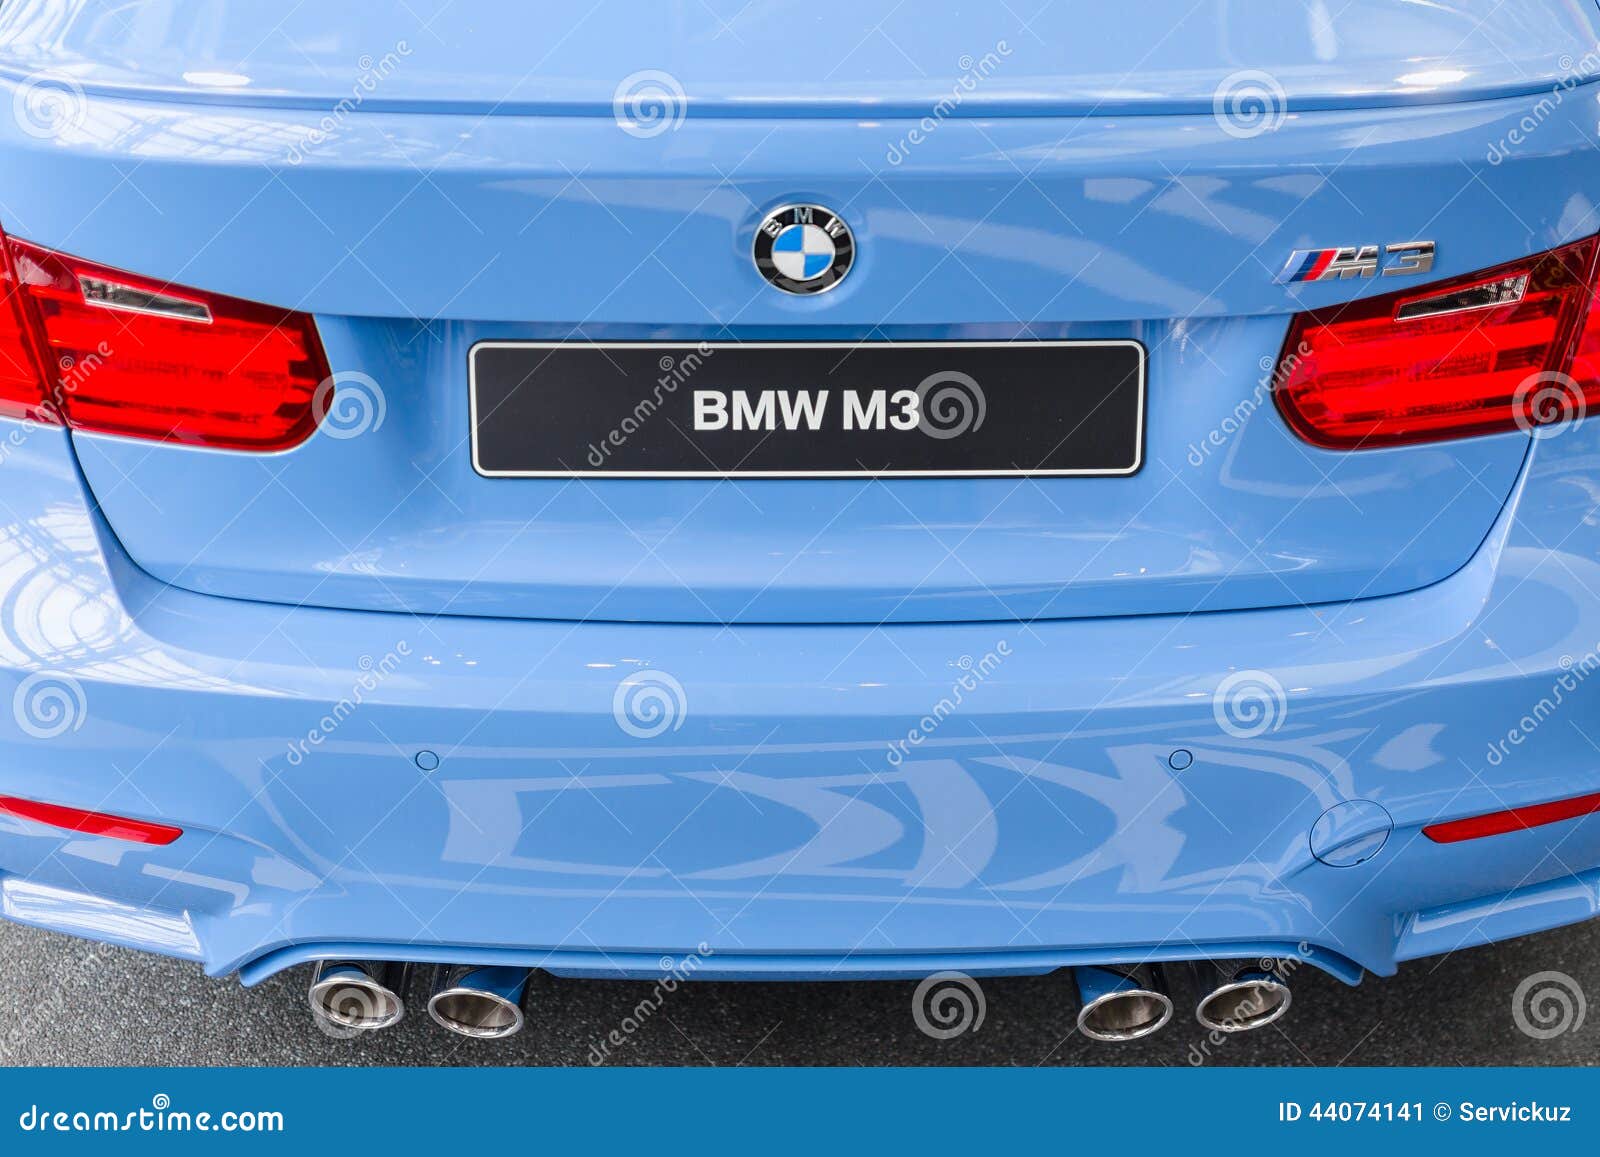 Rear View of Generation Model BMW M3 Editorial Photo - Image of automobile, 44074141